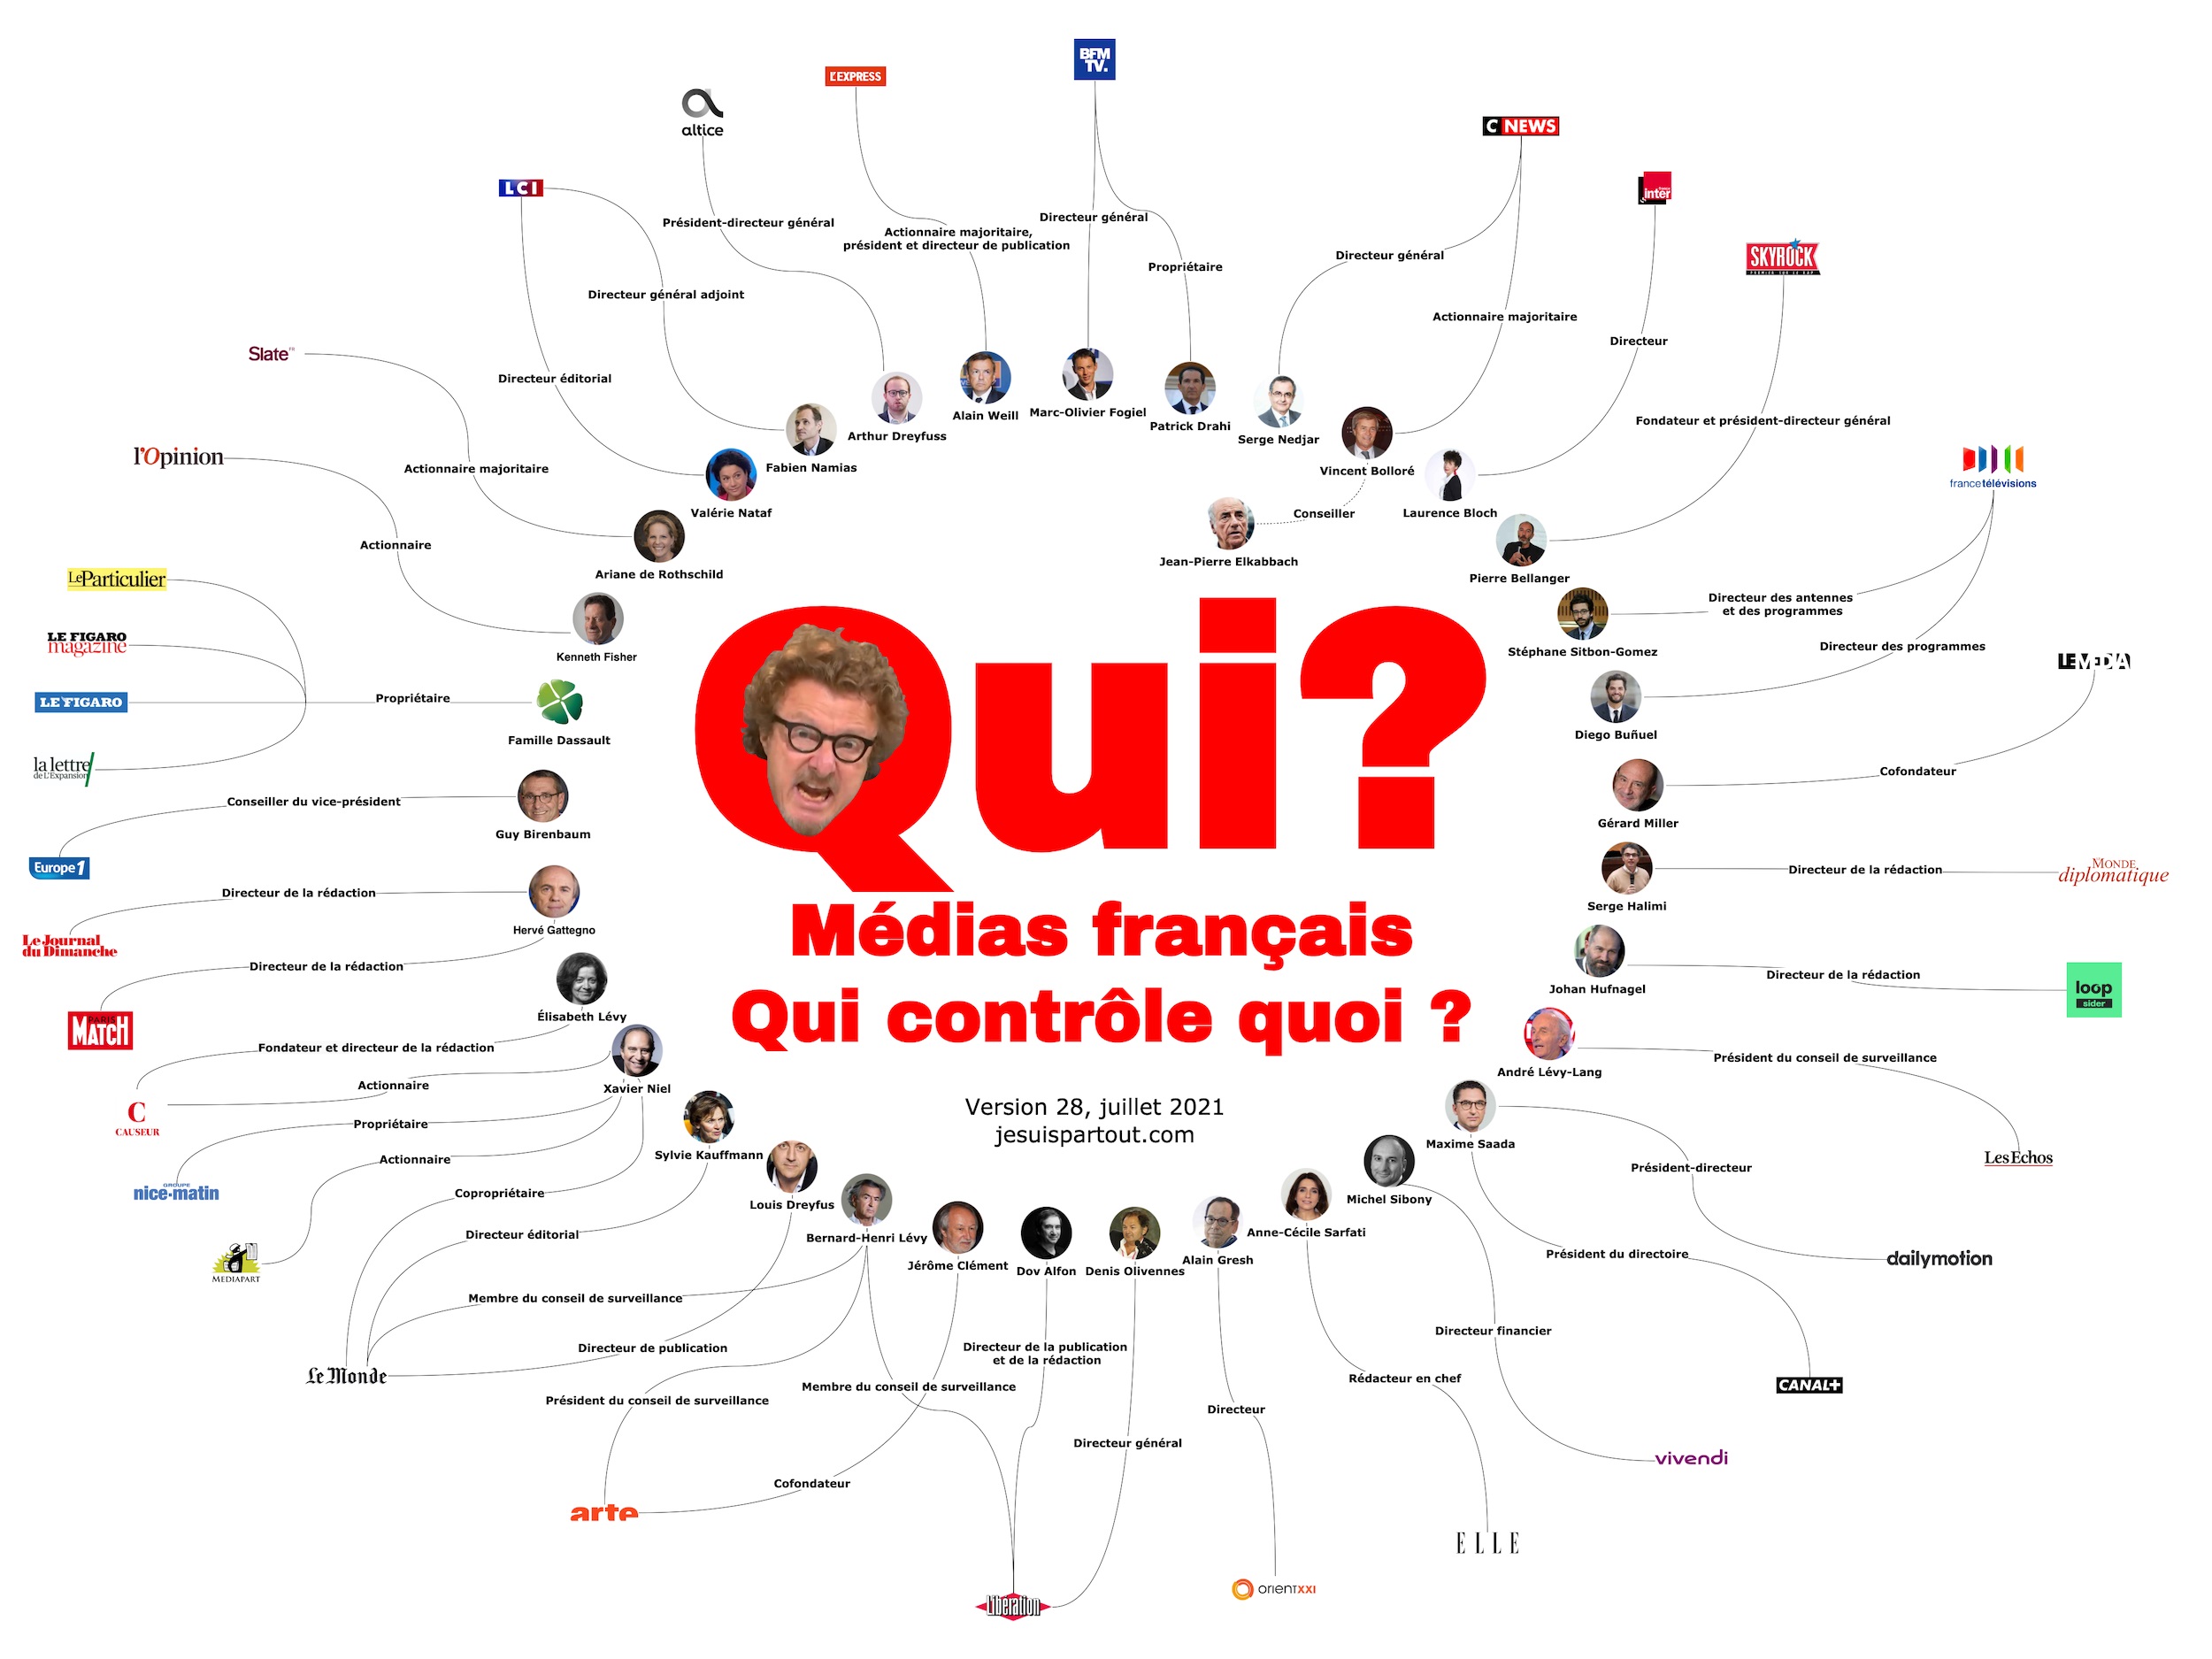 Who controls the French medias?